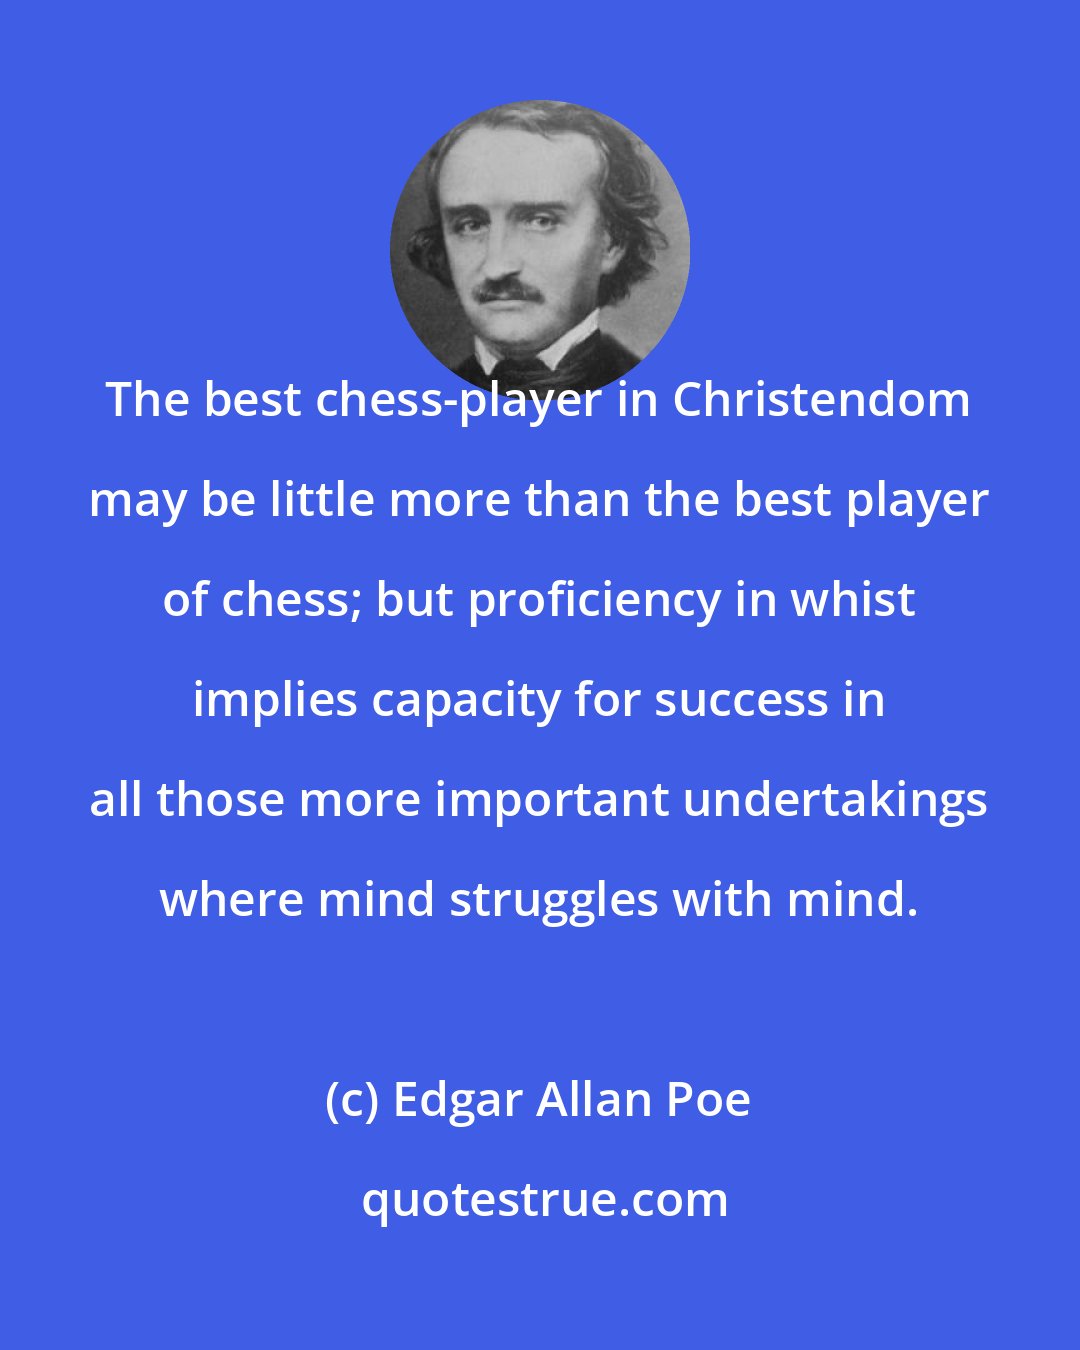 Edgar Allan Poe: The best chess-player in Christendom may be little more than the best player of chess; but proficiency in whist implies capacity for success in all those more important undertakings where mind struggles with mind.